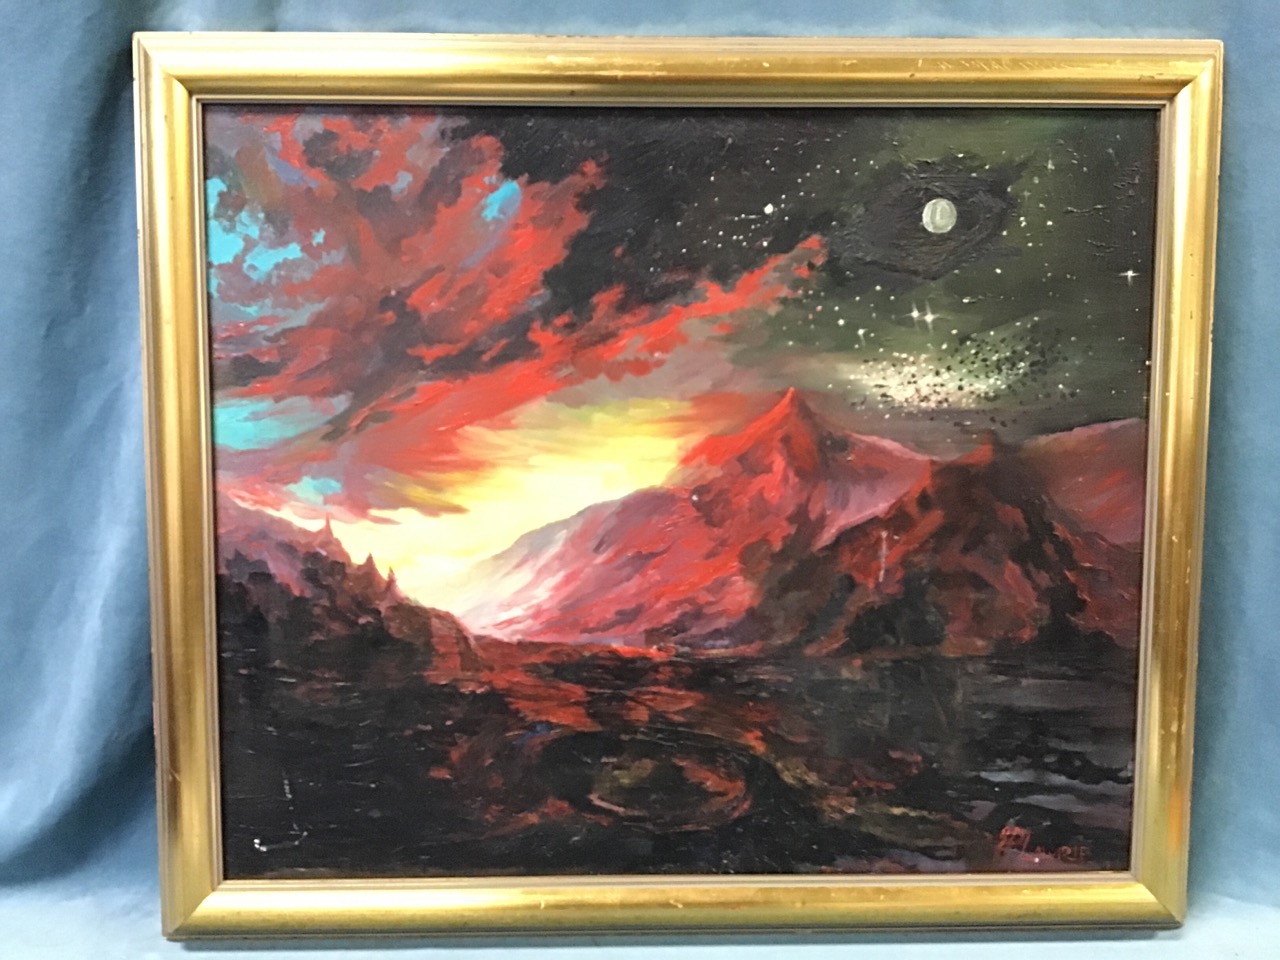 JP Laurie, oil on canvas, moonlight hill landscape, signed & gilt framed. (29.5in x 24.5in) - Image 2 of 3